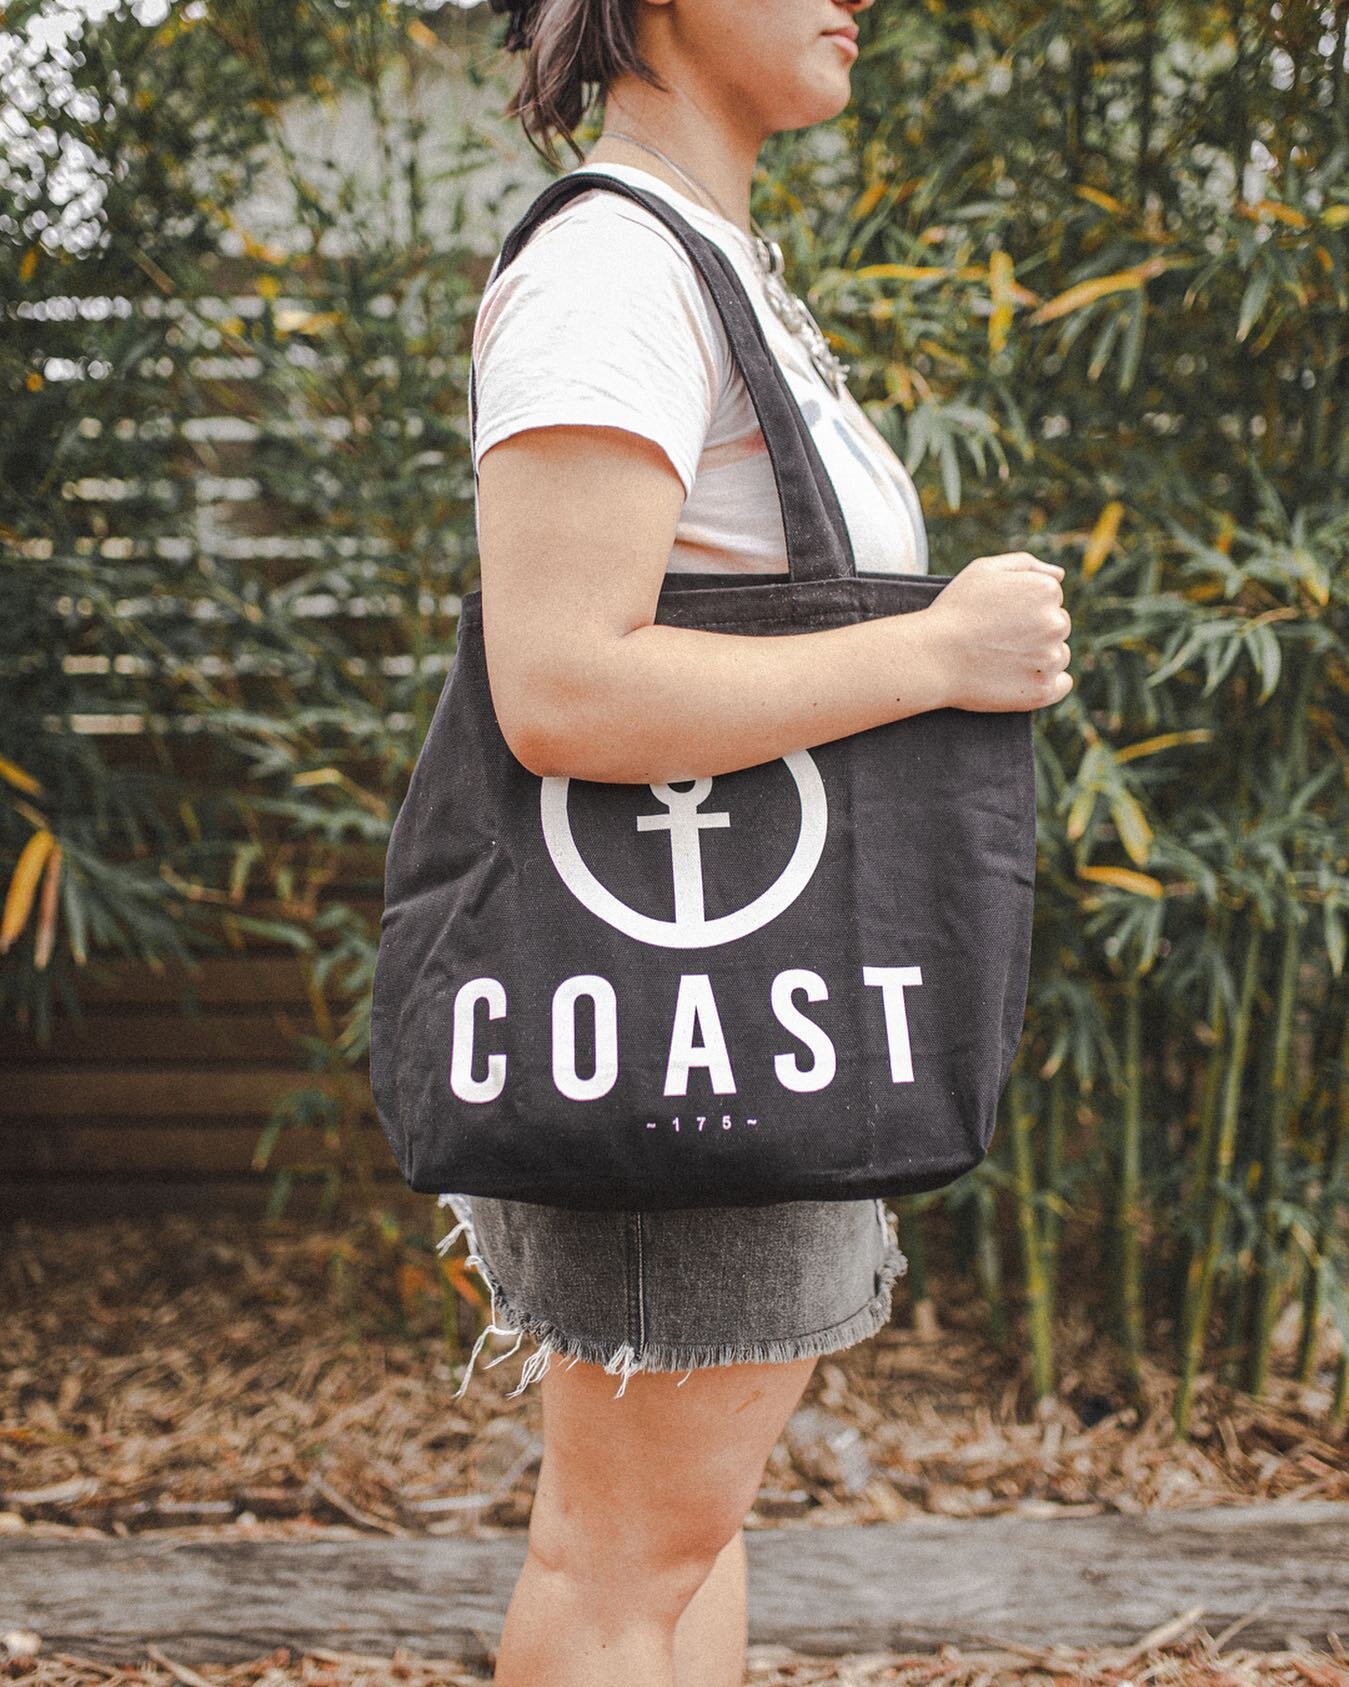 Coast tote bags, available in store.